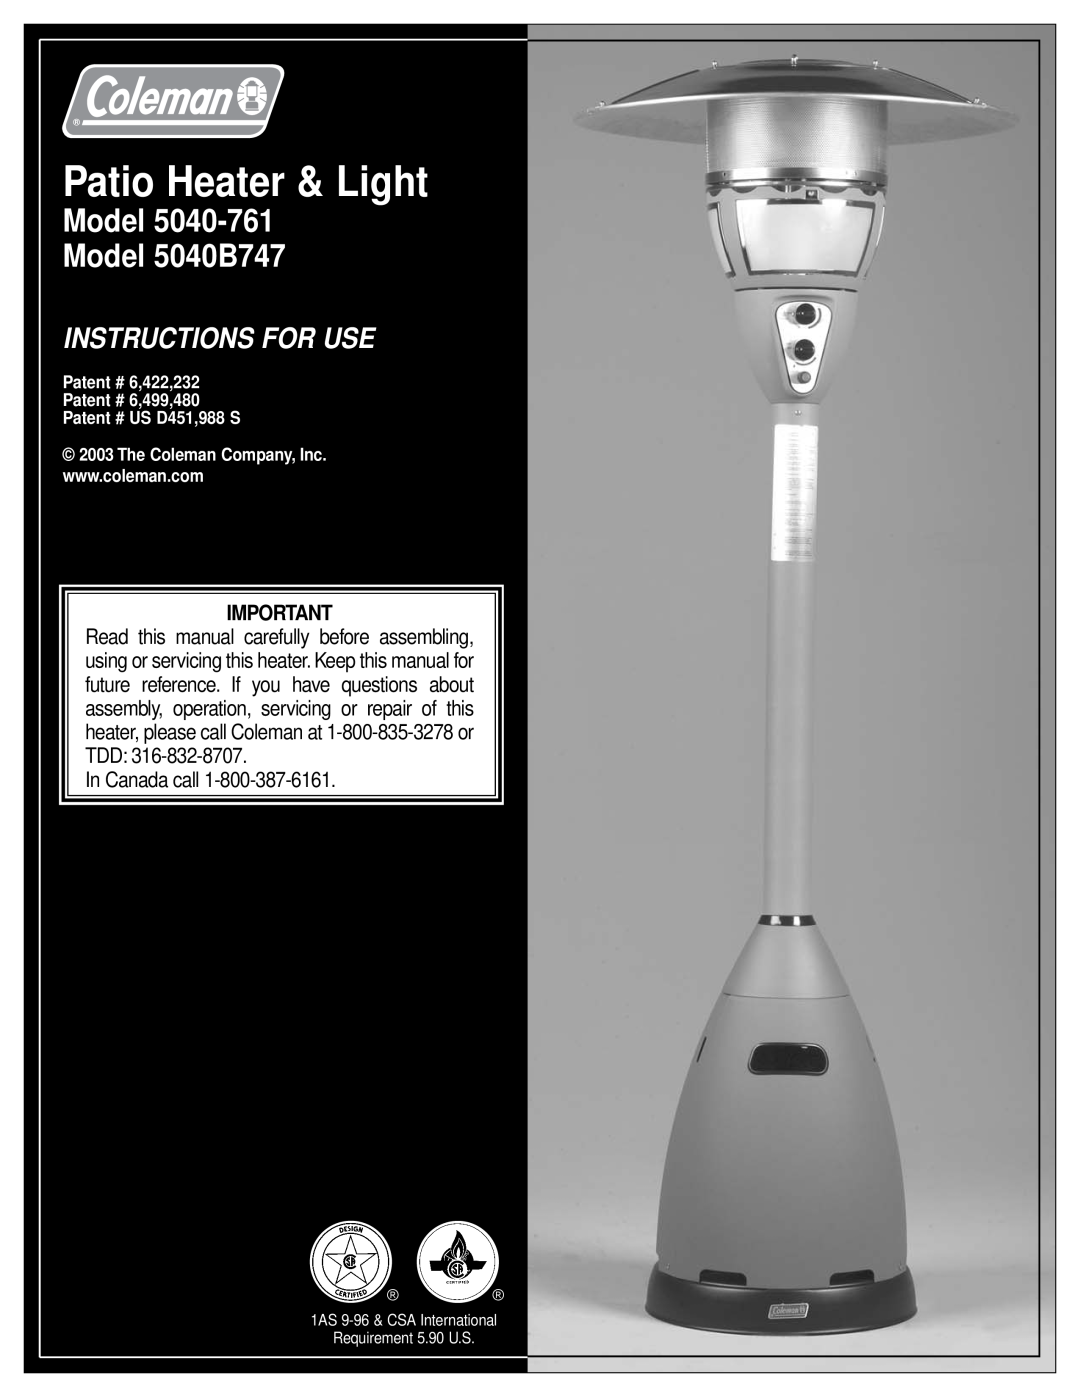 Coleman 5040-761 manual Model Model 5040B747, Patio Heater & Light, Instructions For Use, In Canada call 